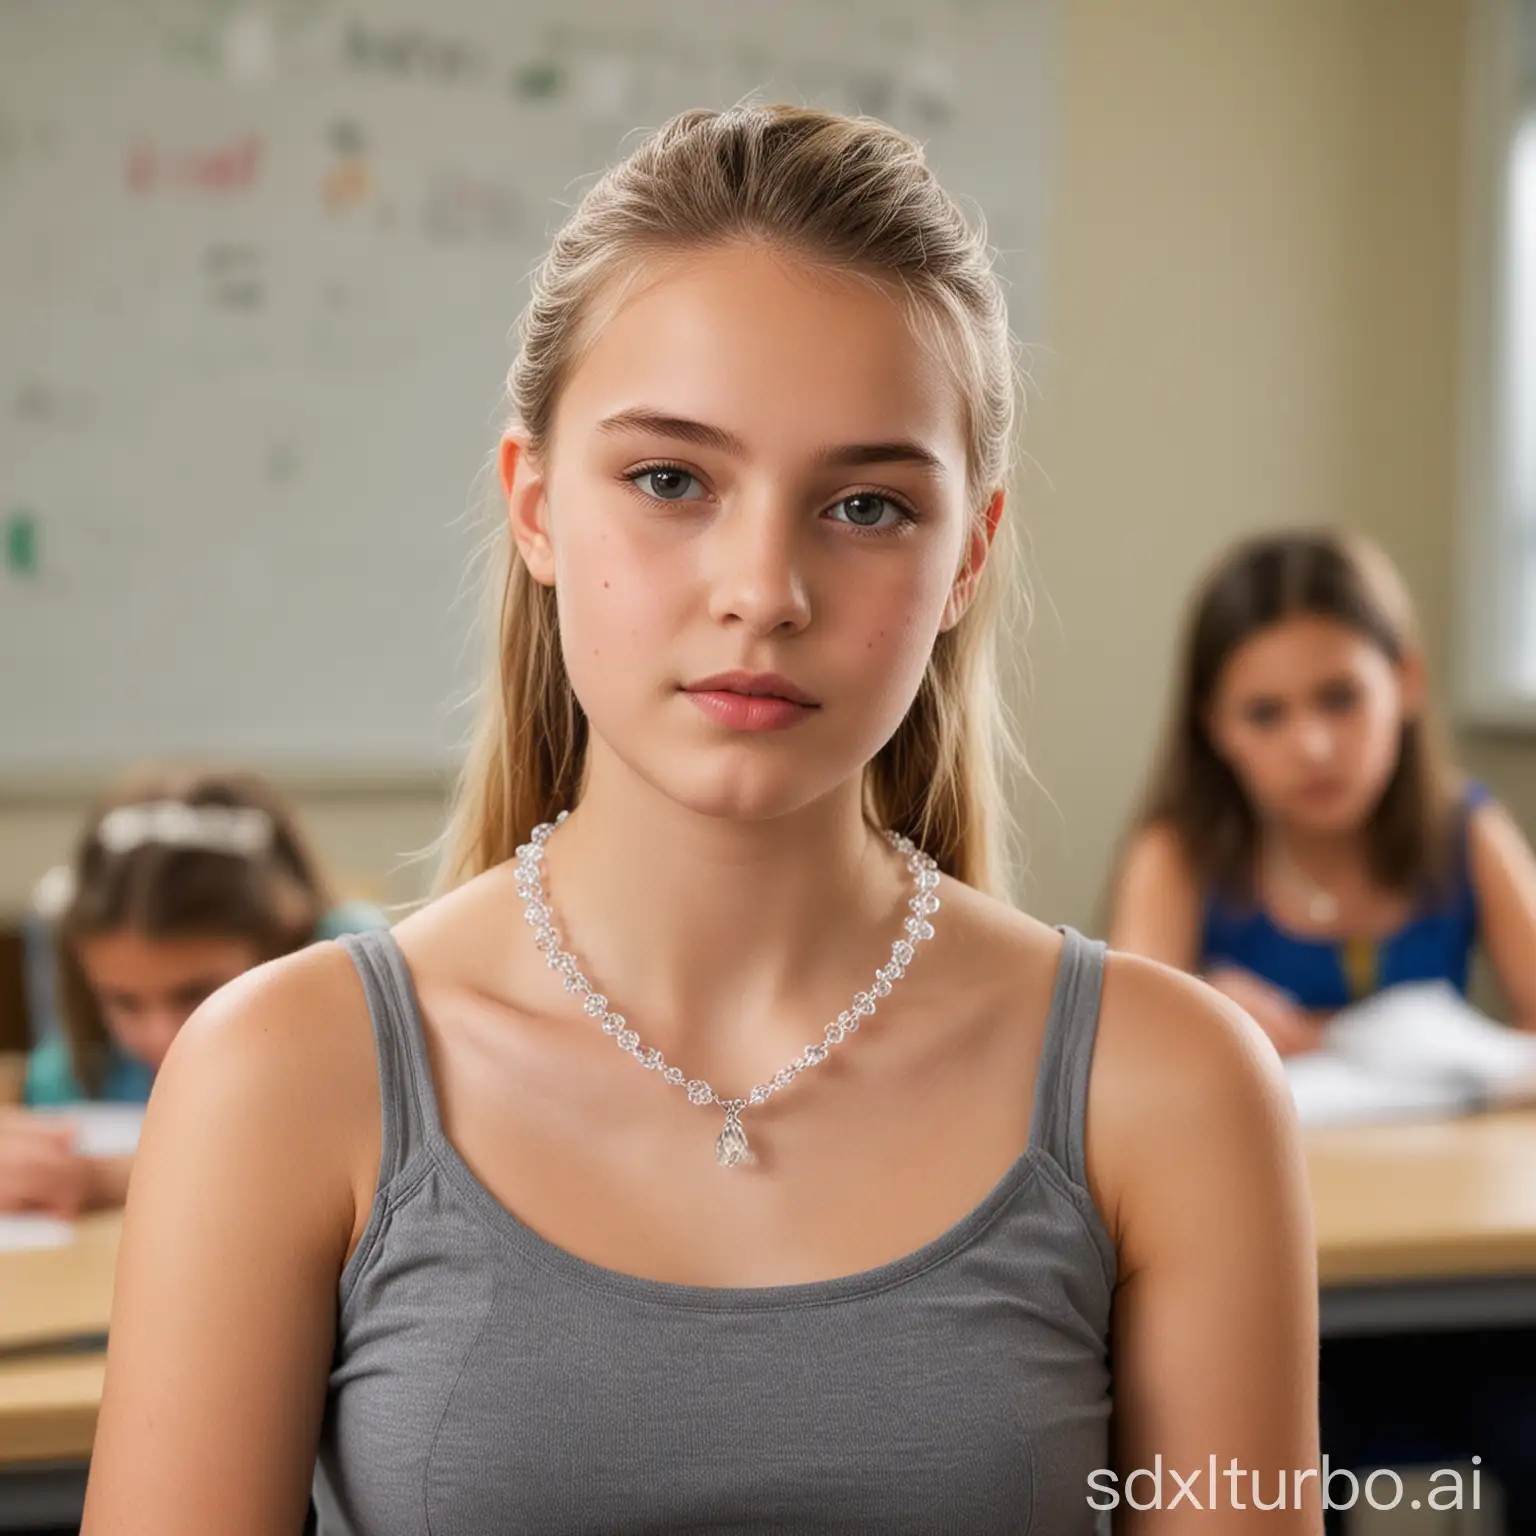 Young-Model-Wearing-Clear-Necklace-in-Classroom